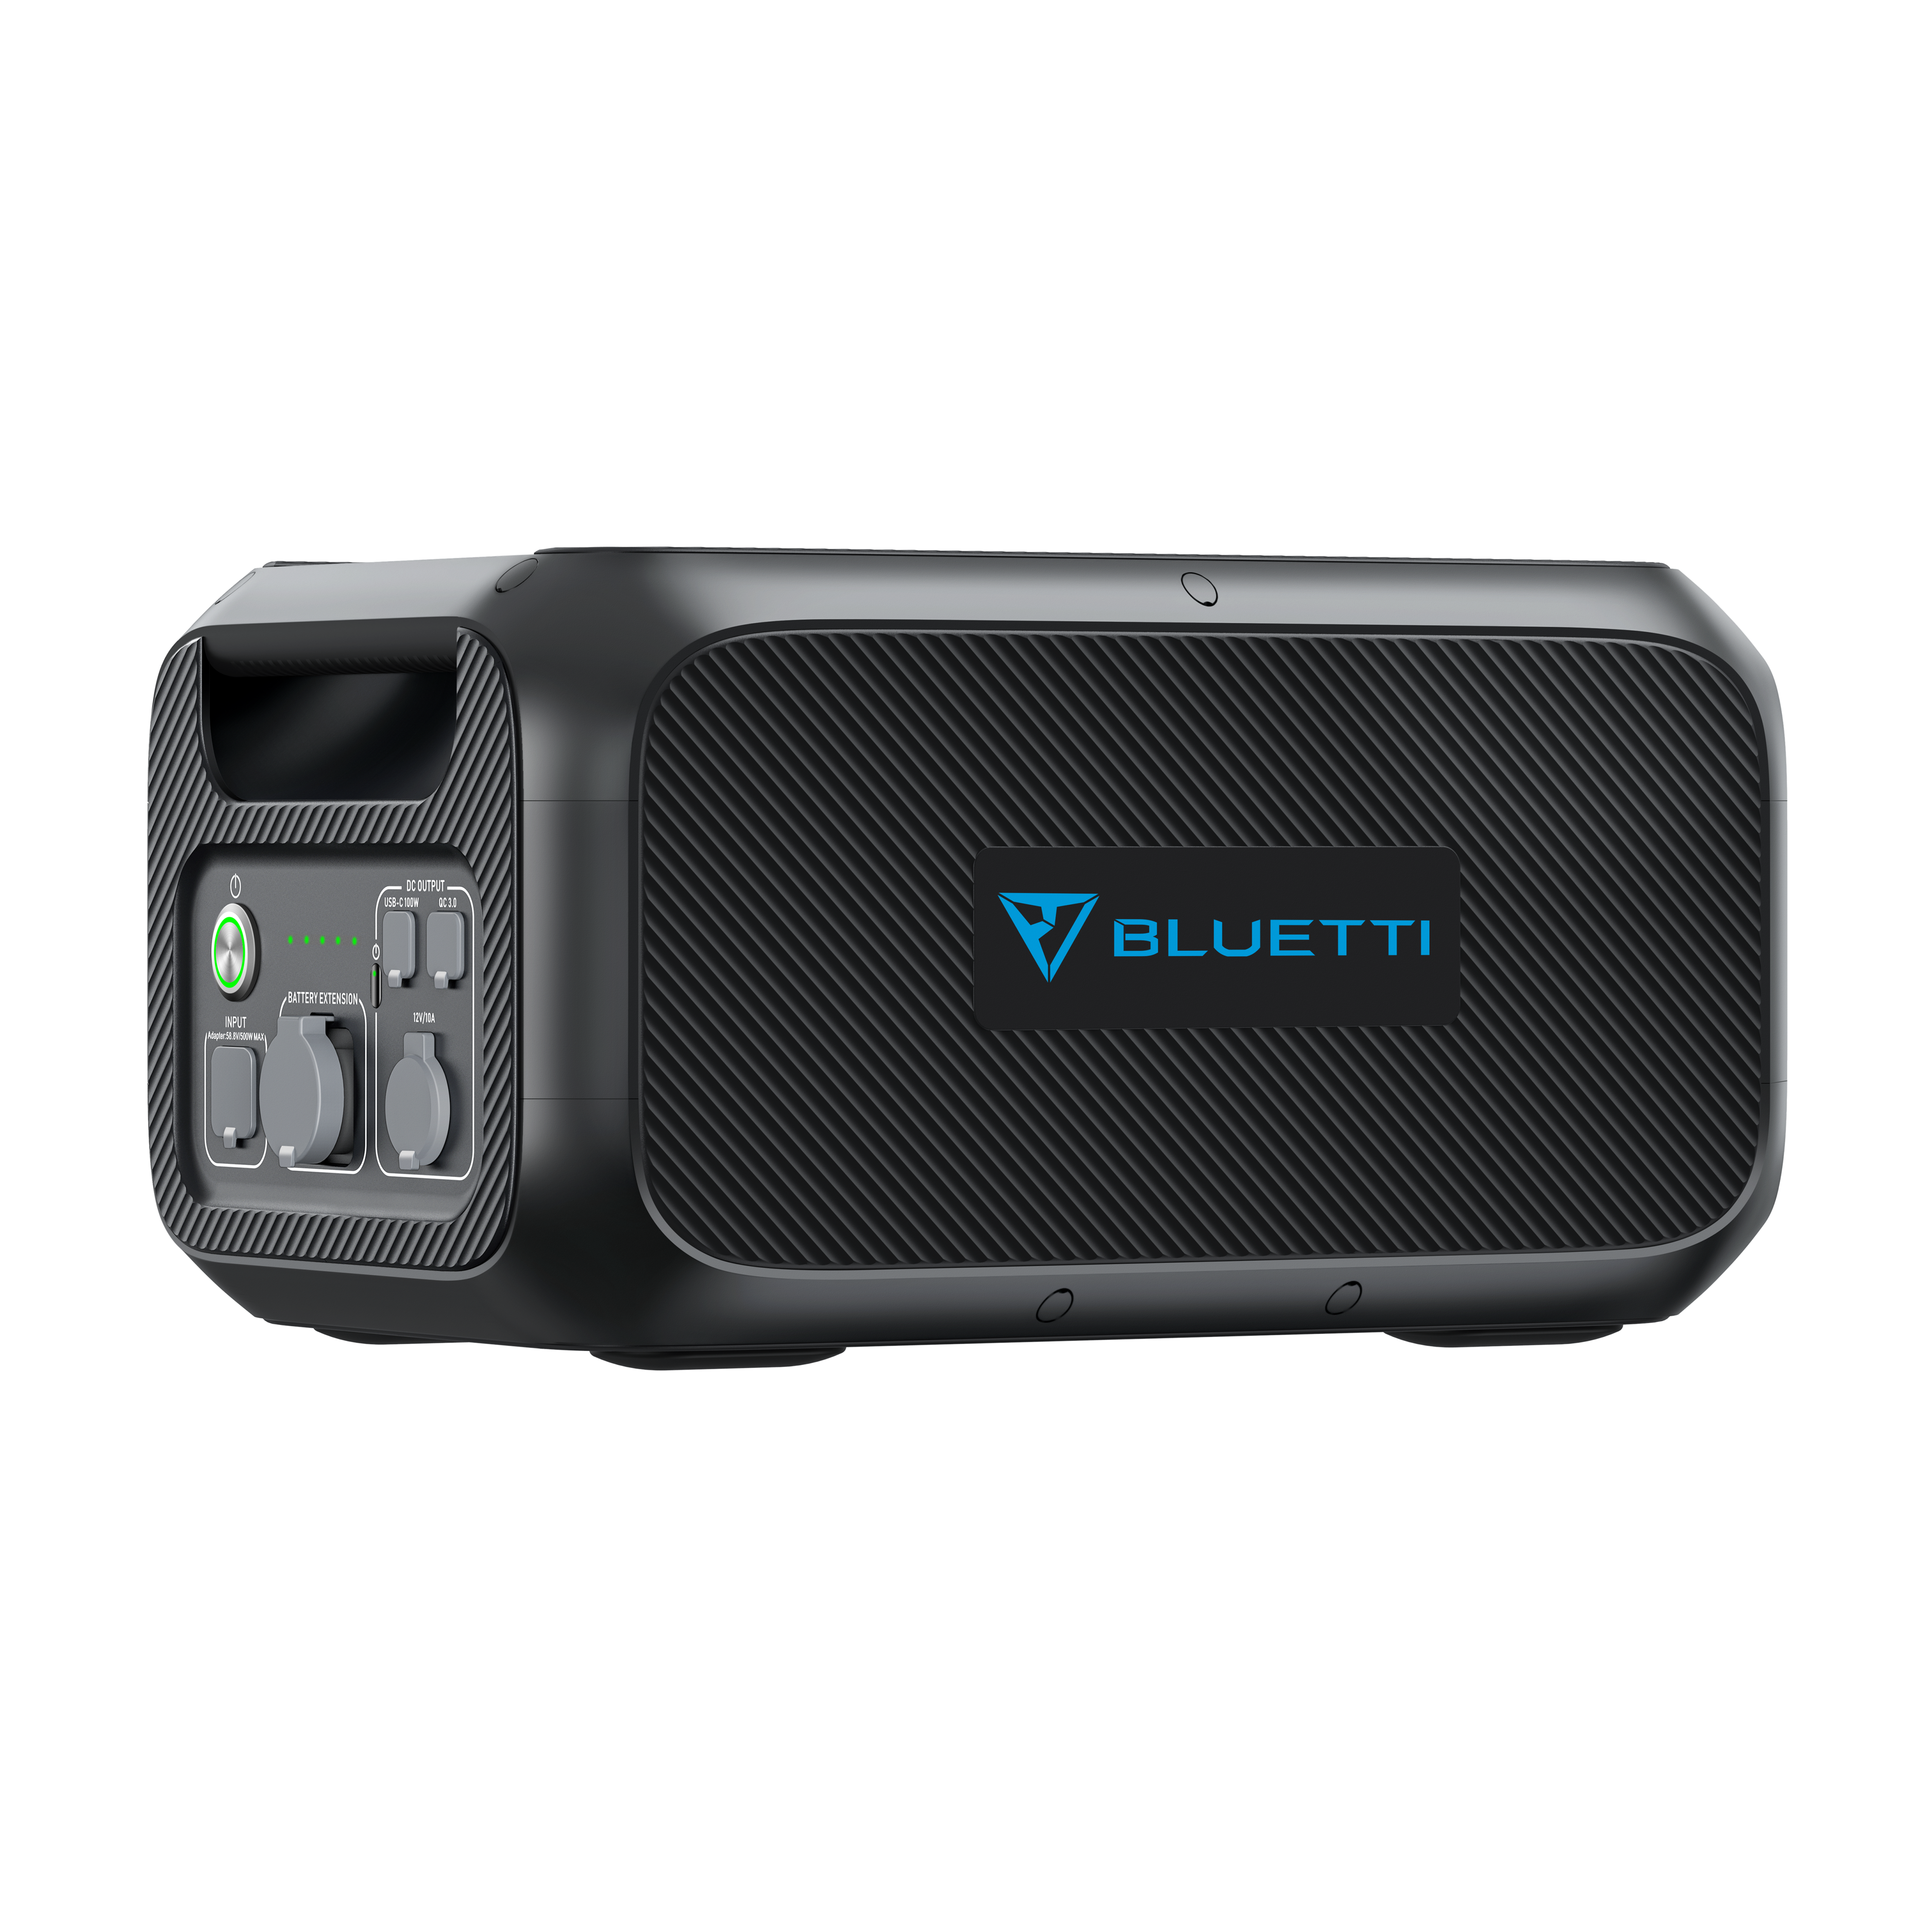 Bluetti B230 2048Wh Expansion Battery - Increased Capacity For Your Energy System